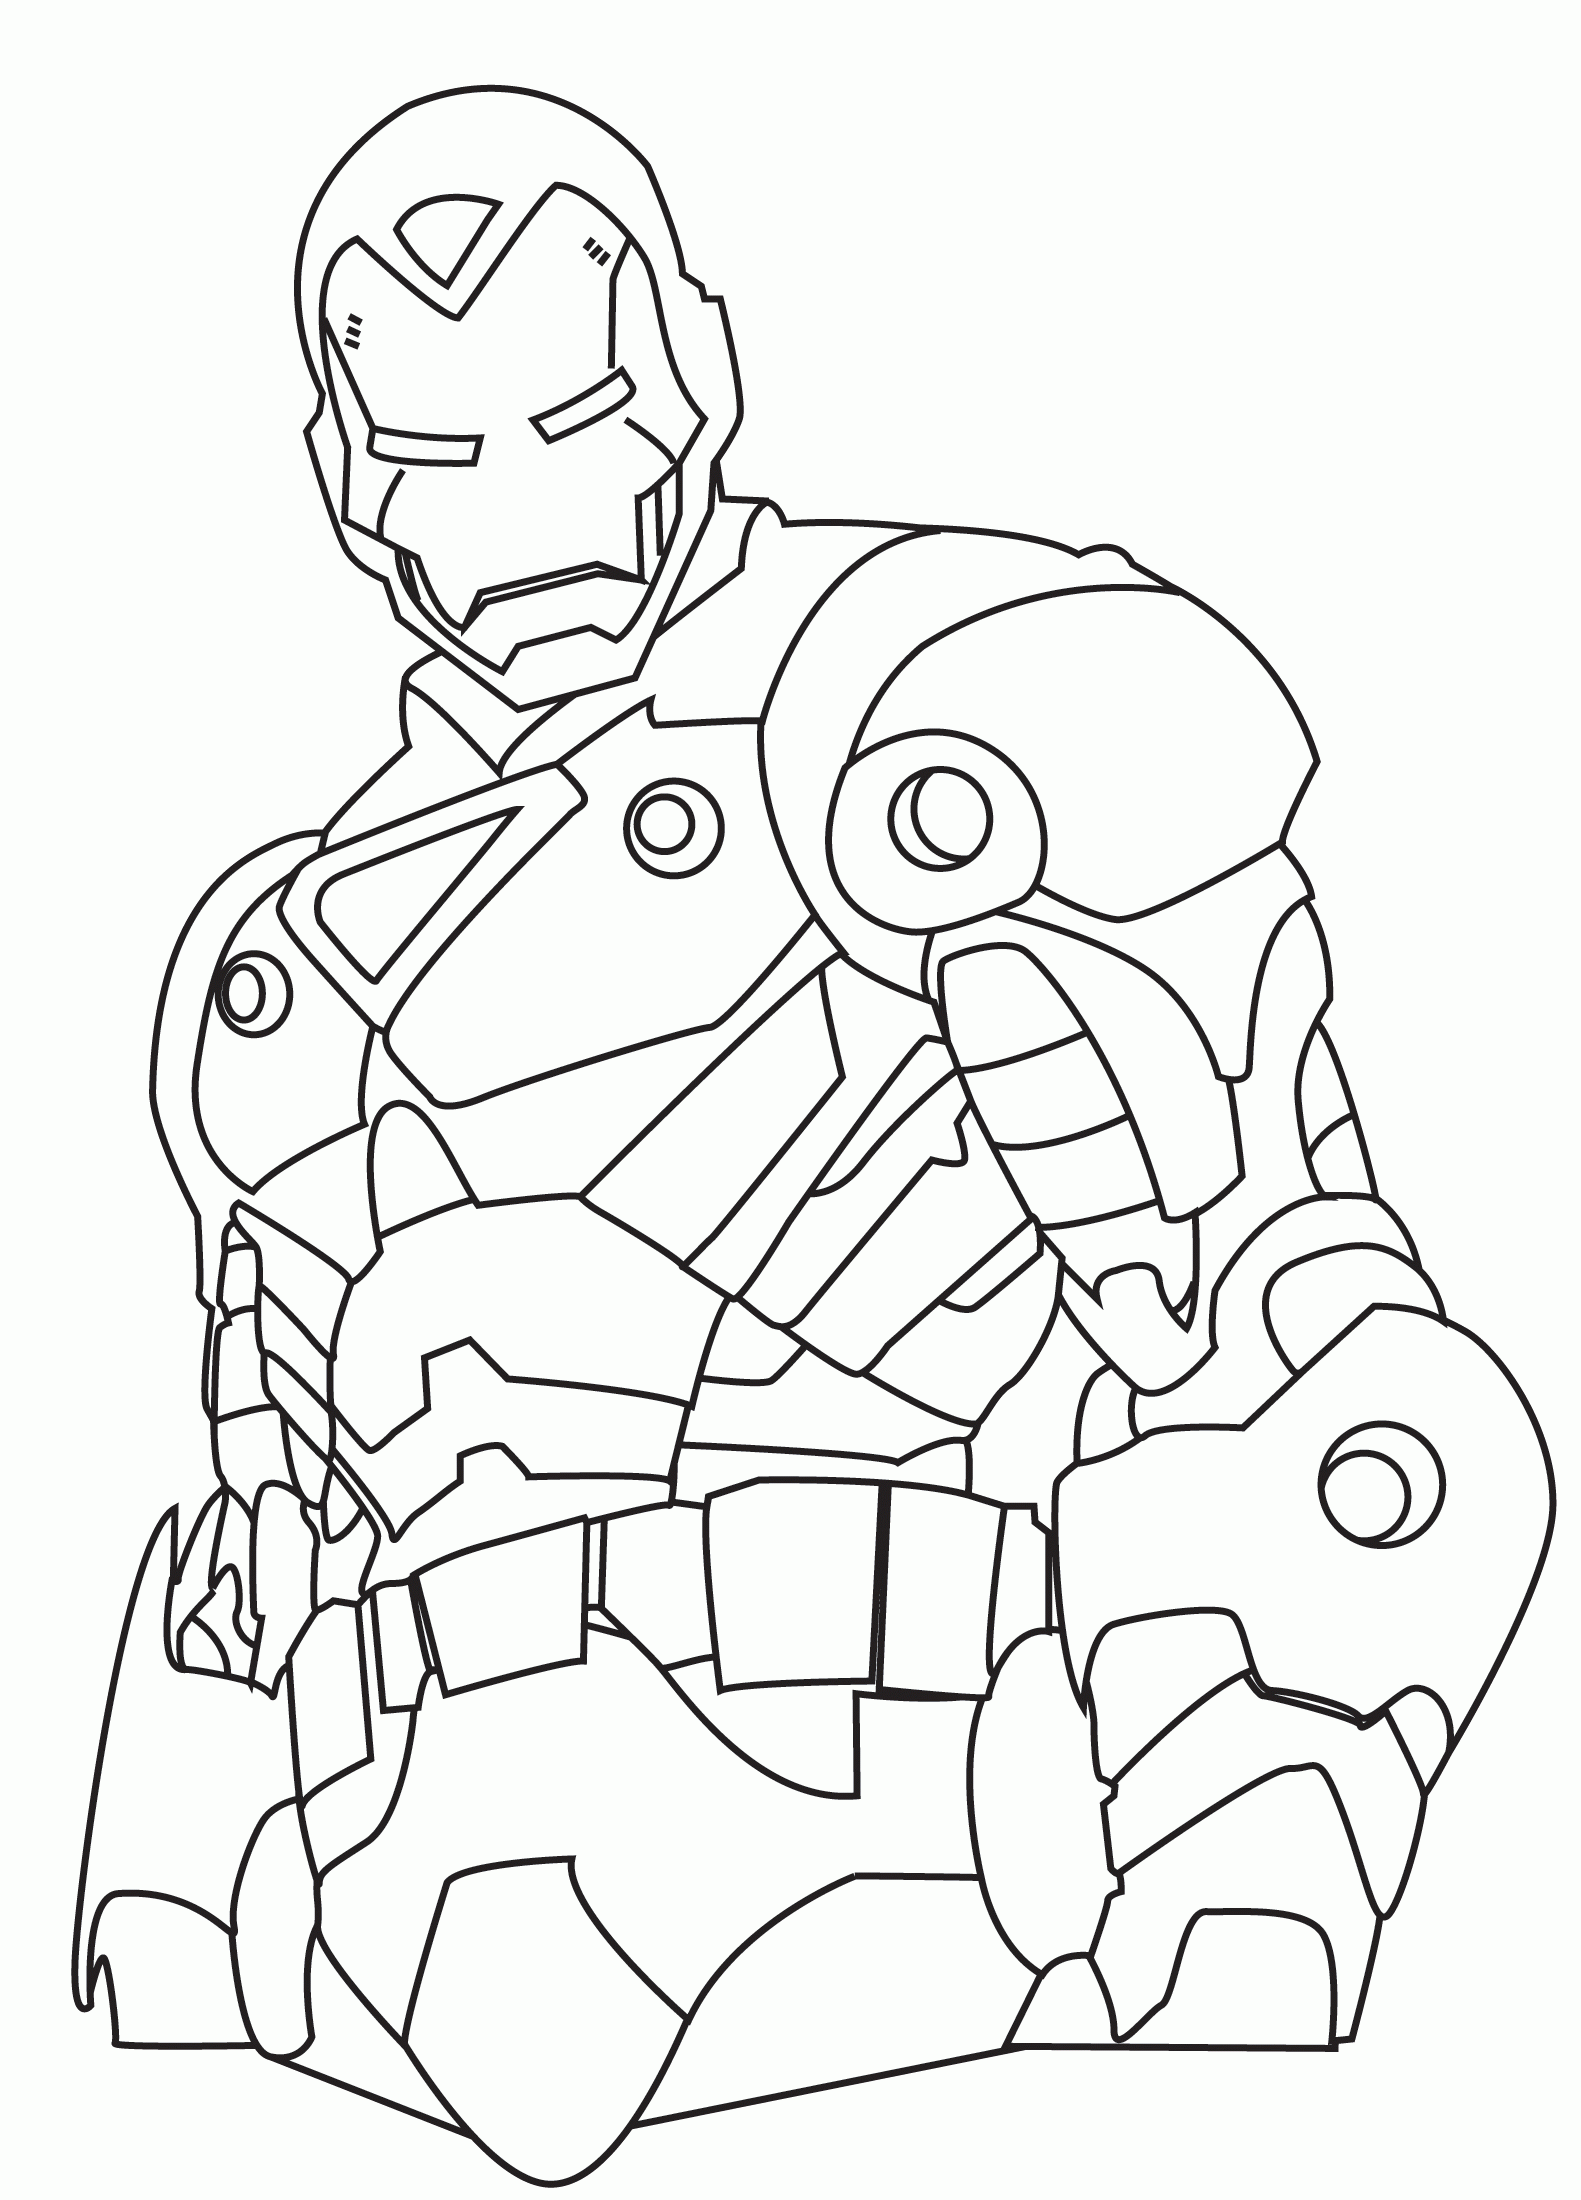 Iron man coloring pages to download for free Iron Man Kids Coloring Pages